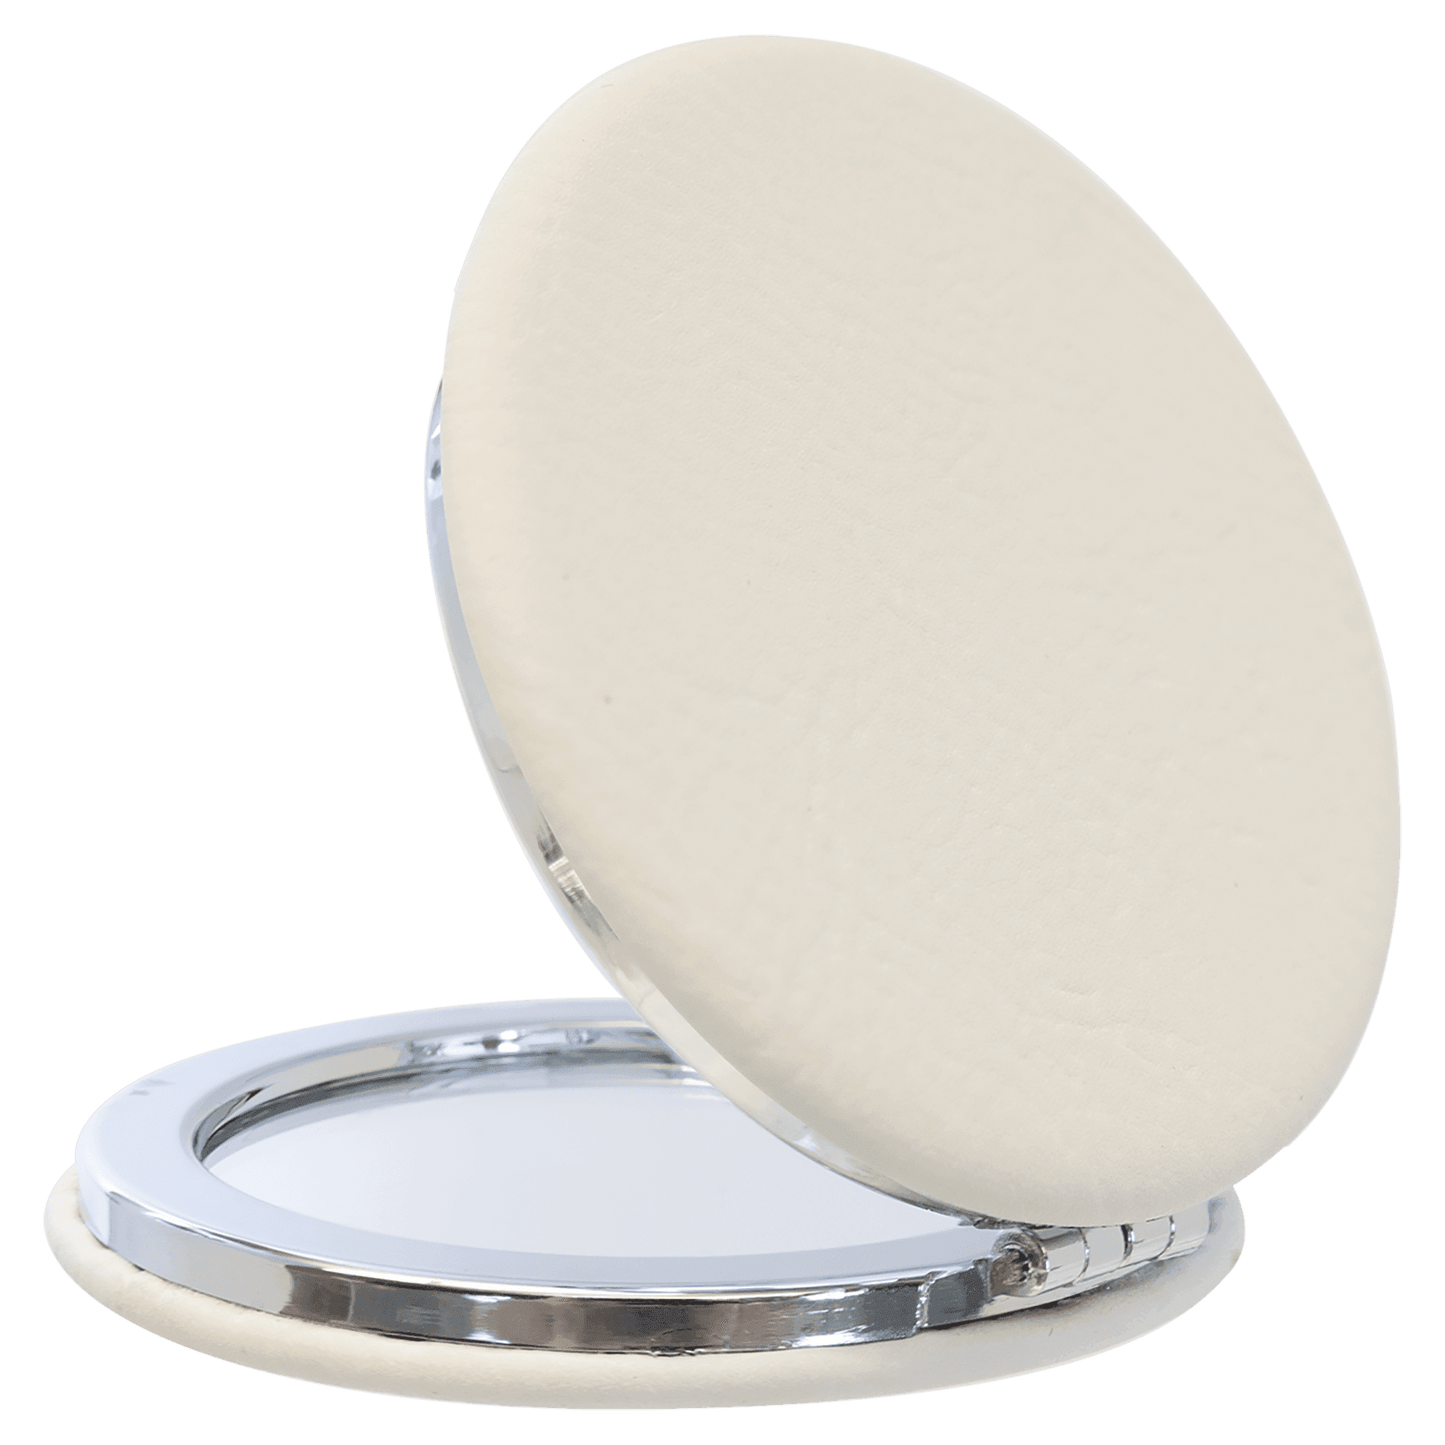 2 1/2" Laserable Leatherette Compact Mirror